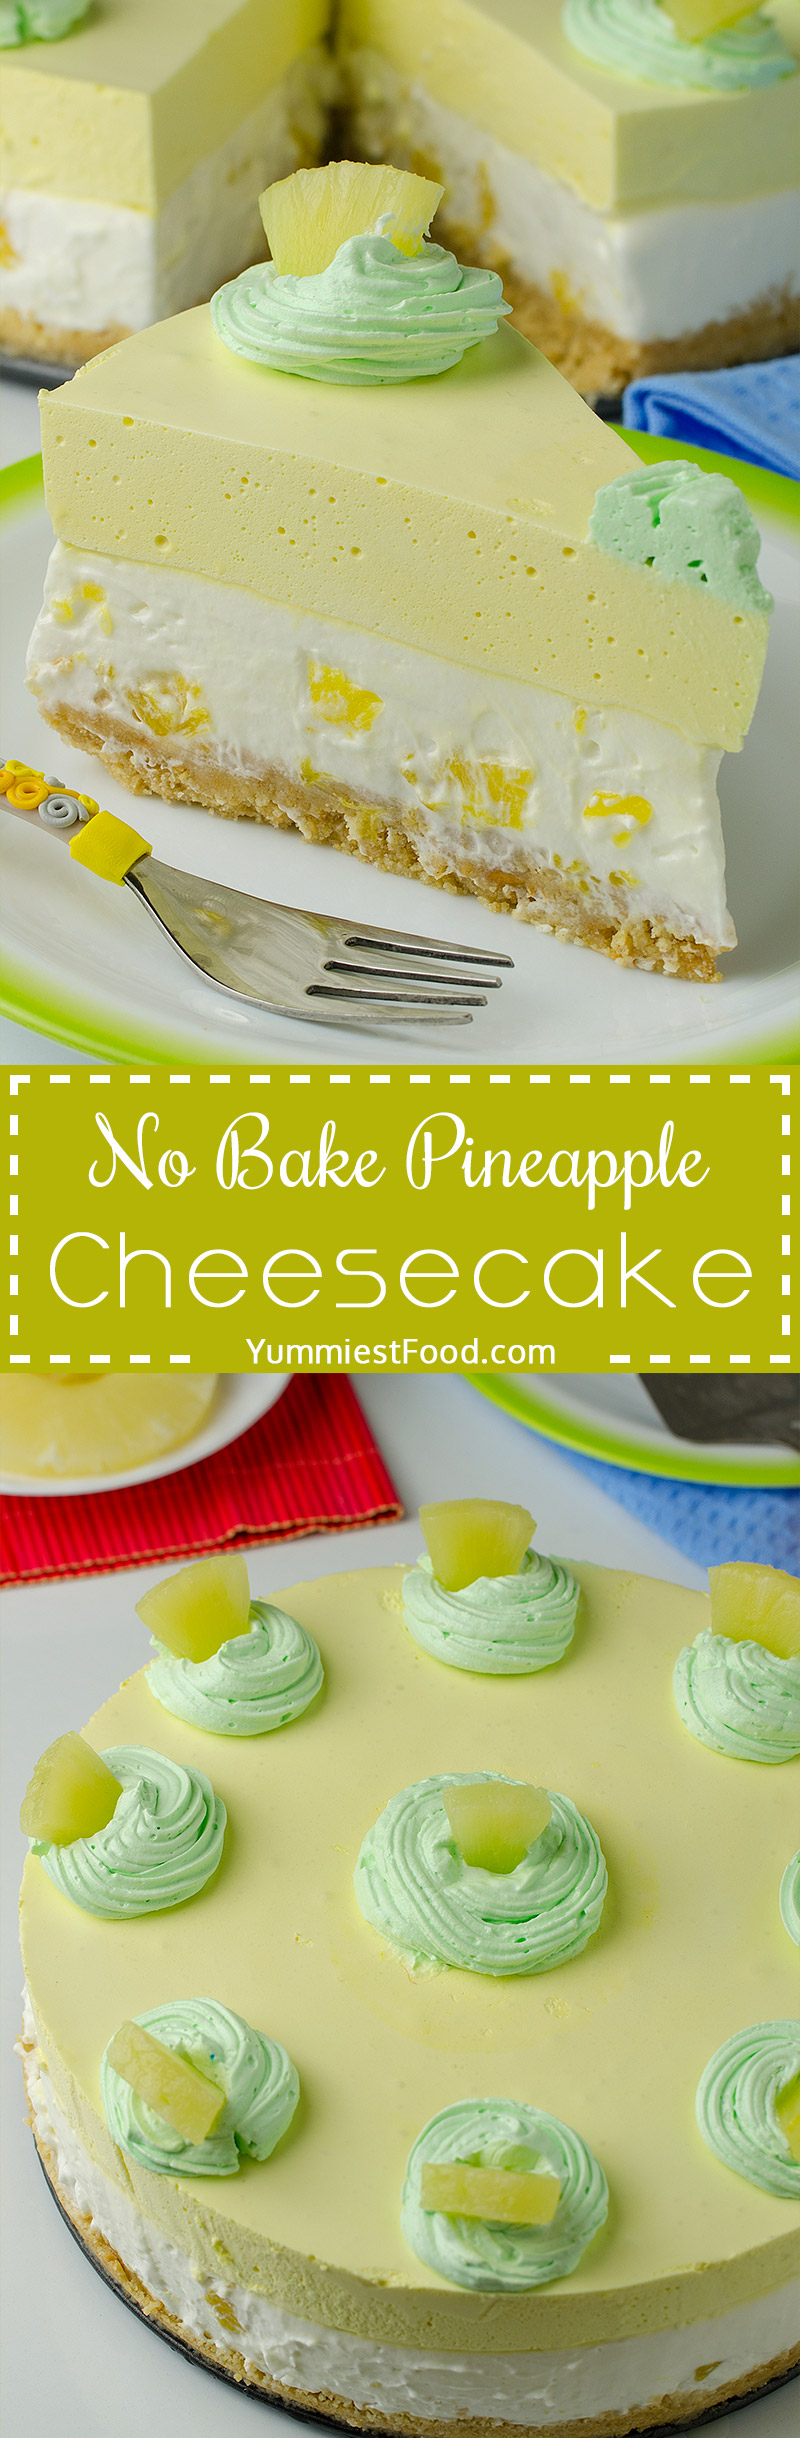 NO BAKE PINEAPPLE CHEESECAKE - is quick and easy dessert recipe for refreshing summer sweet treat